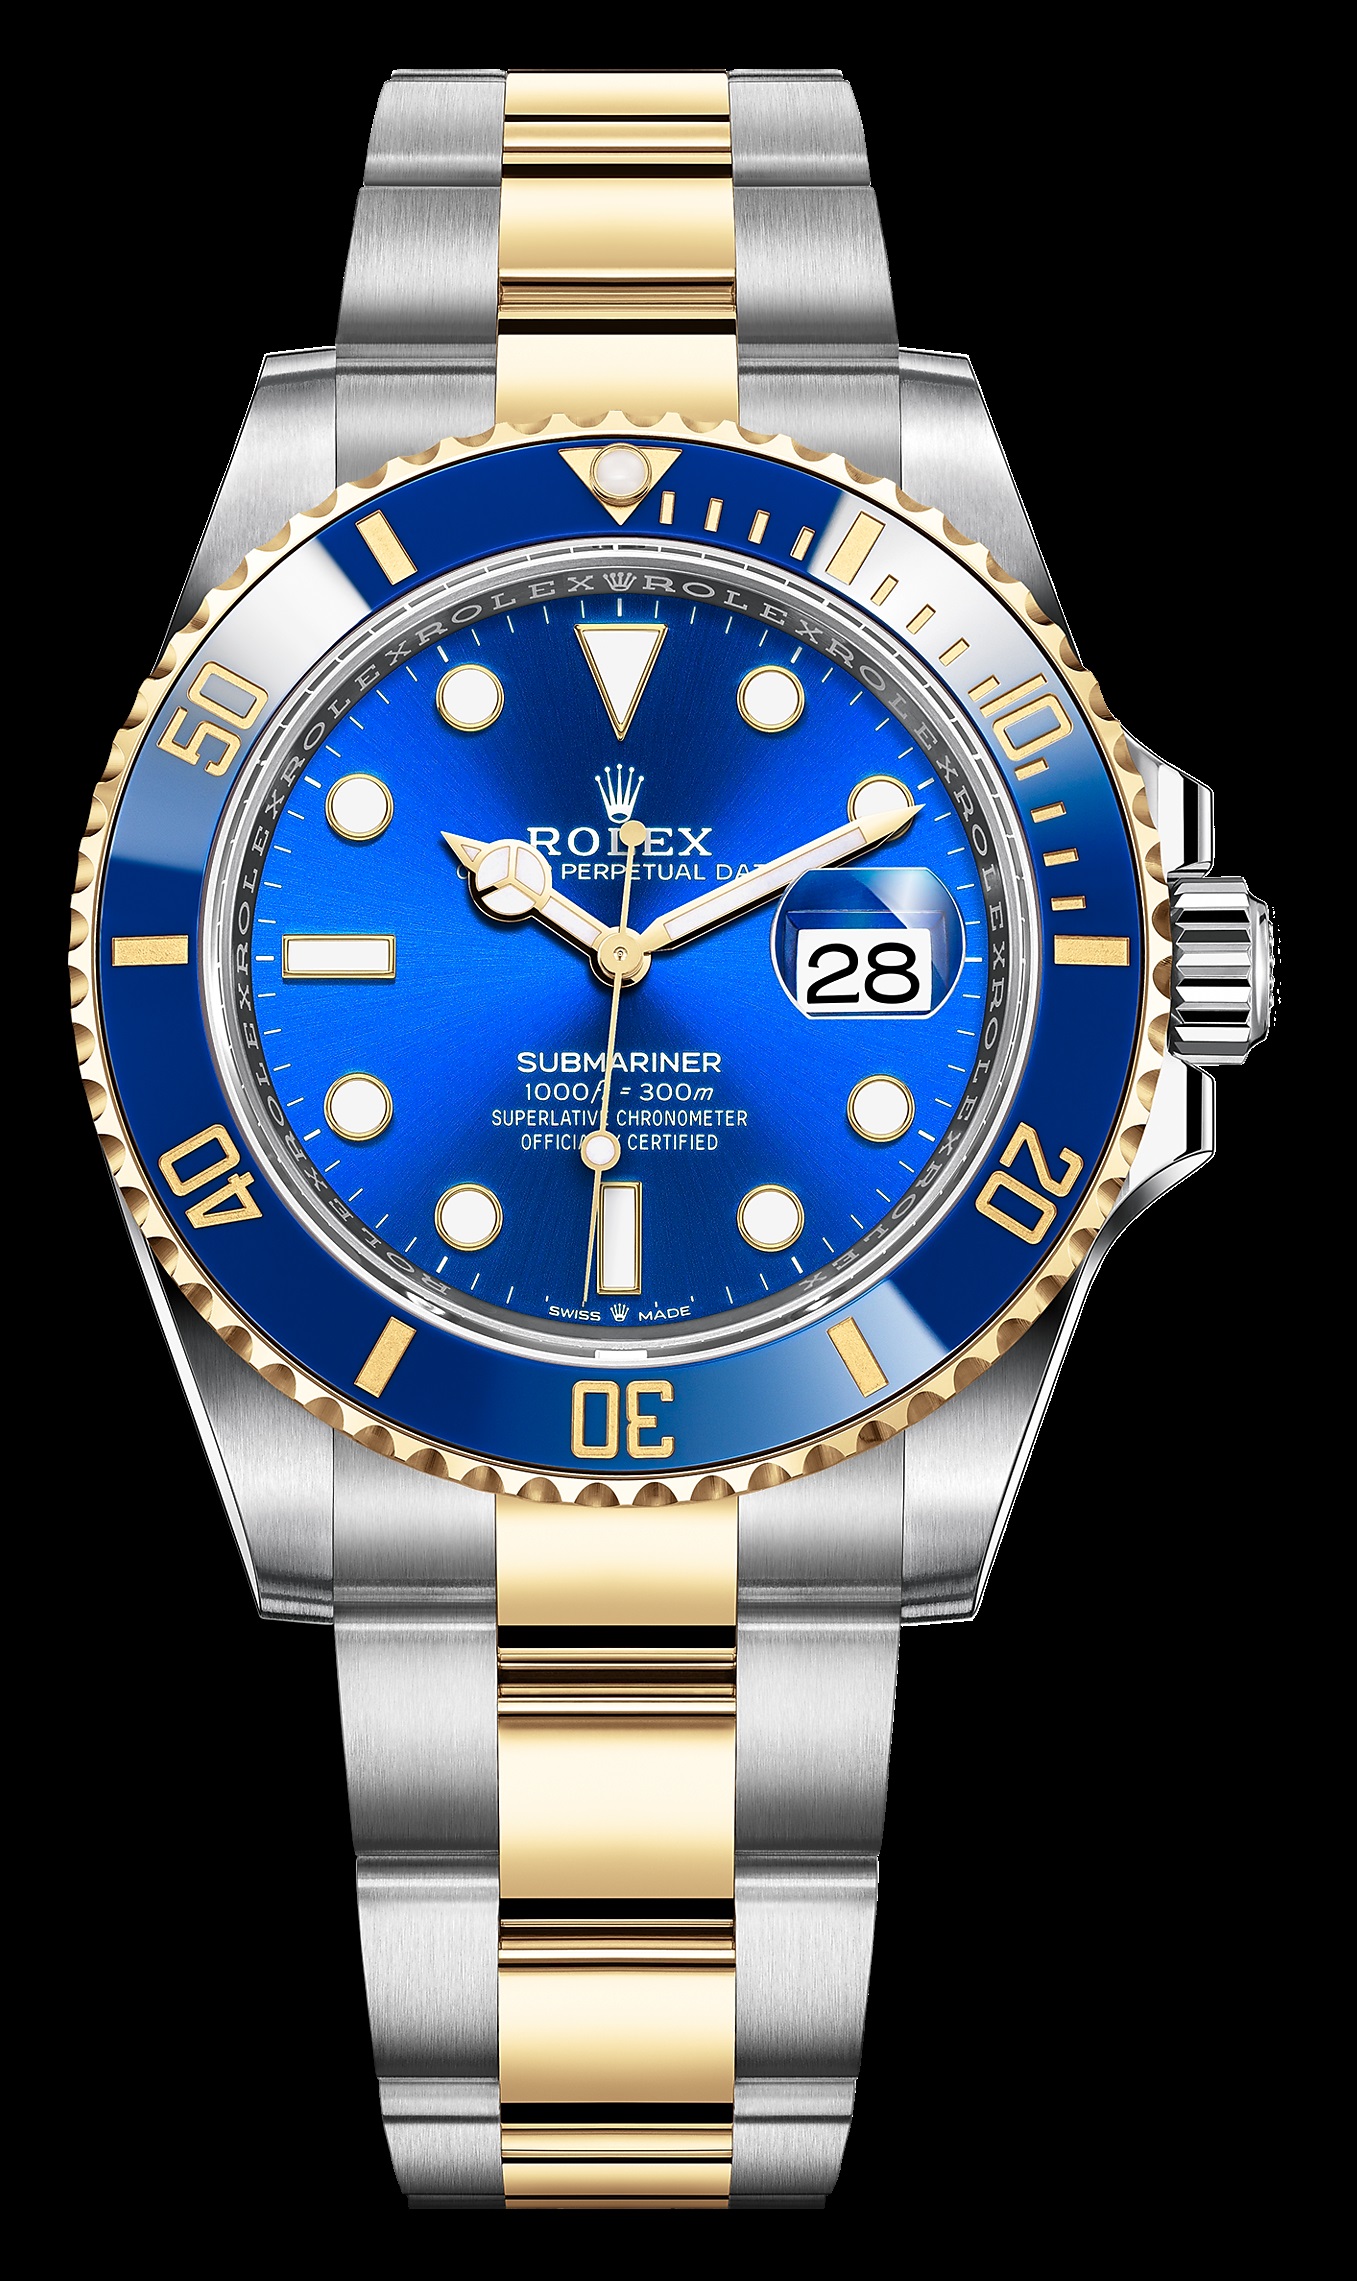 Two-Tone 126613 Submariner Watch Models 